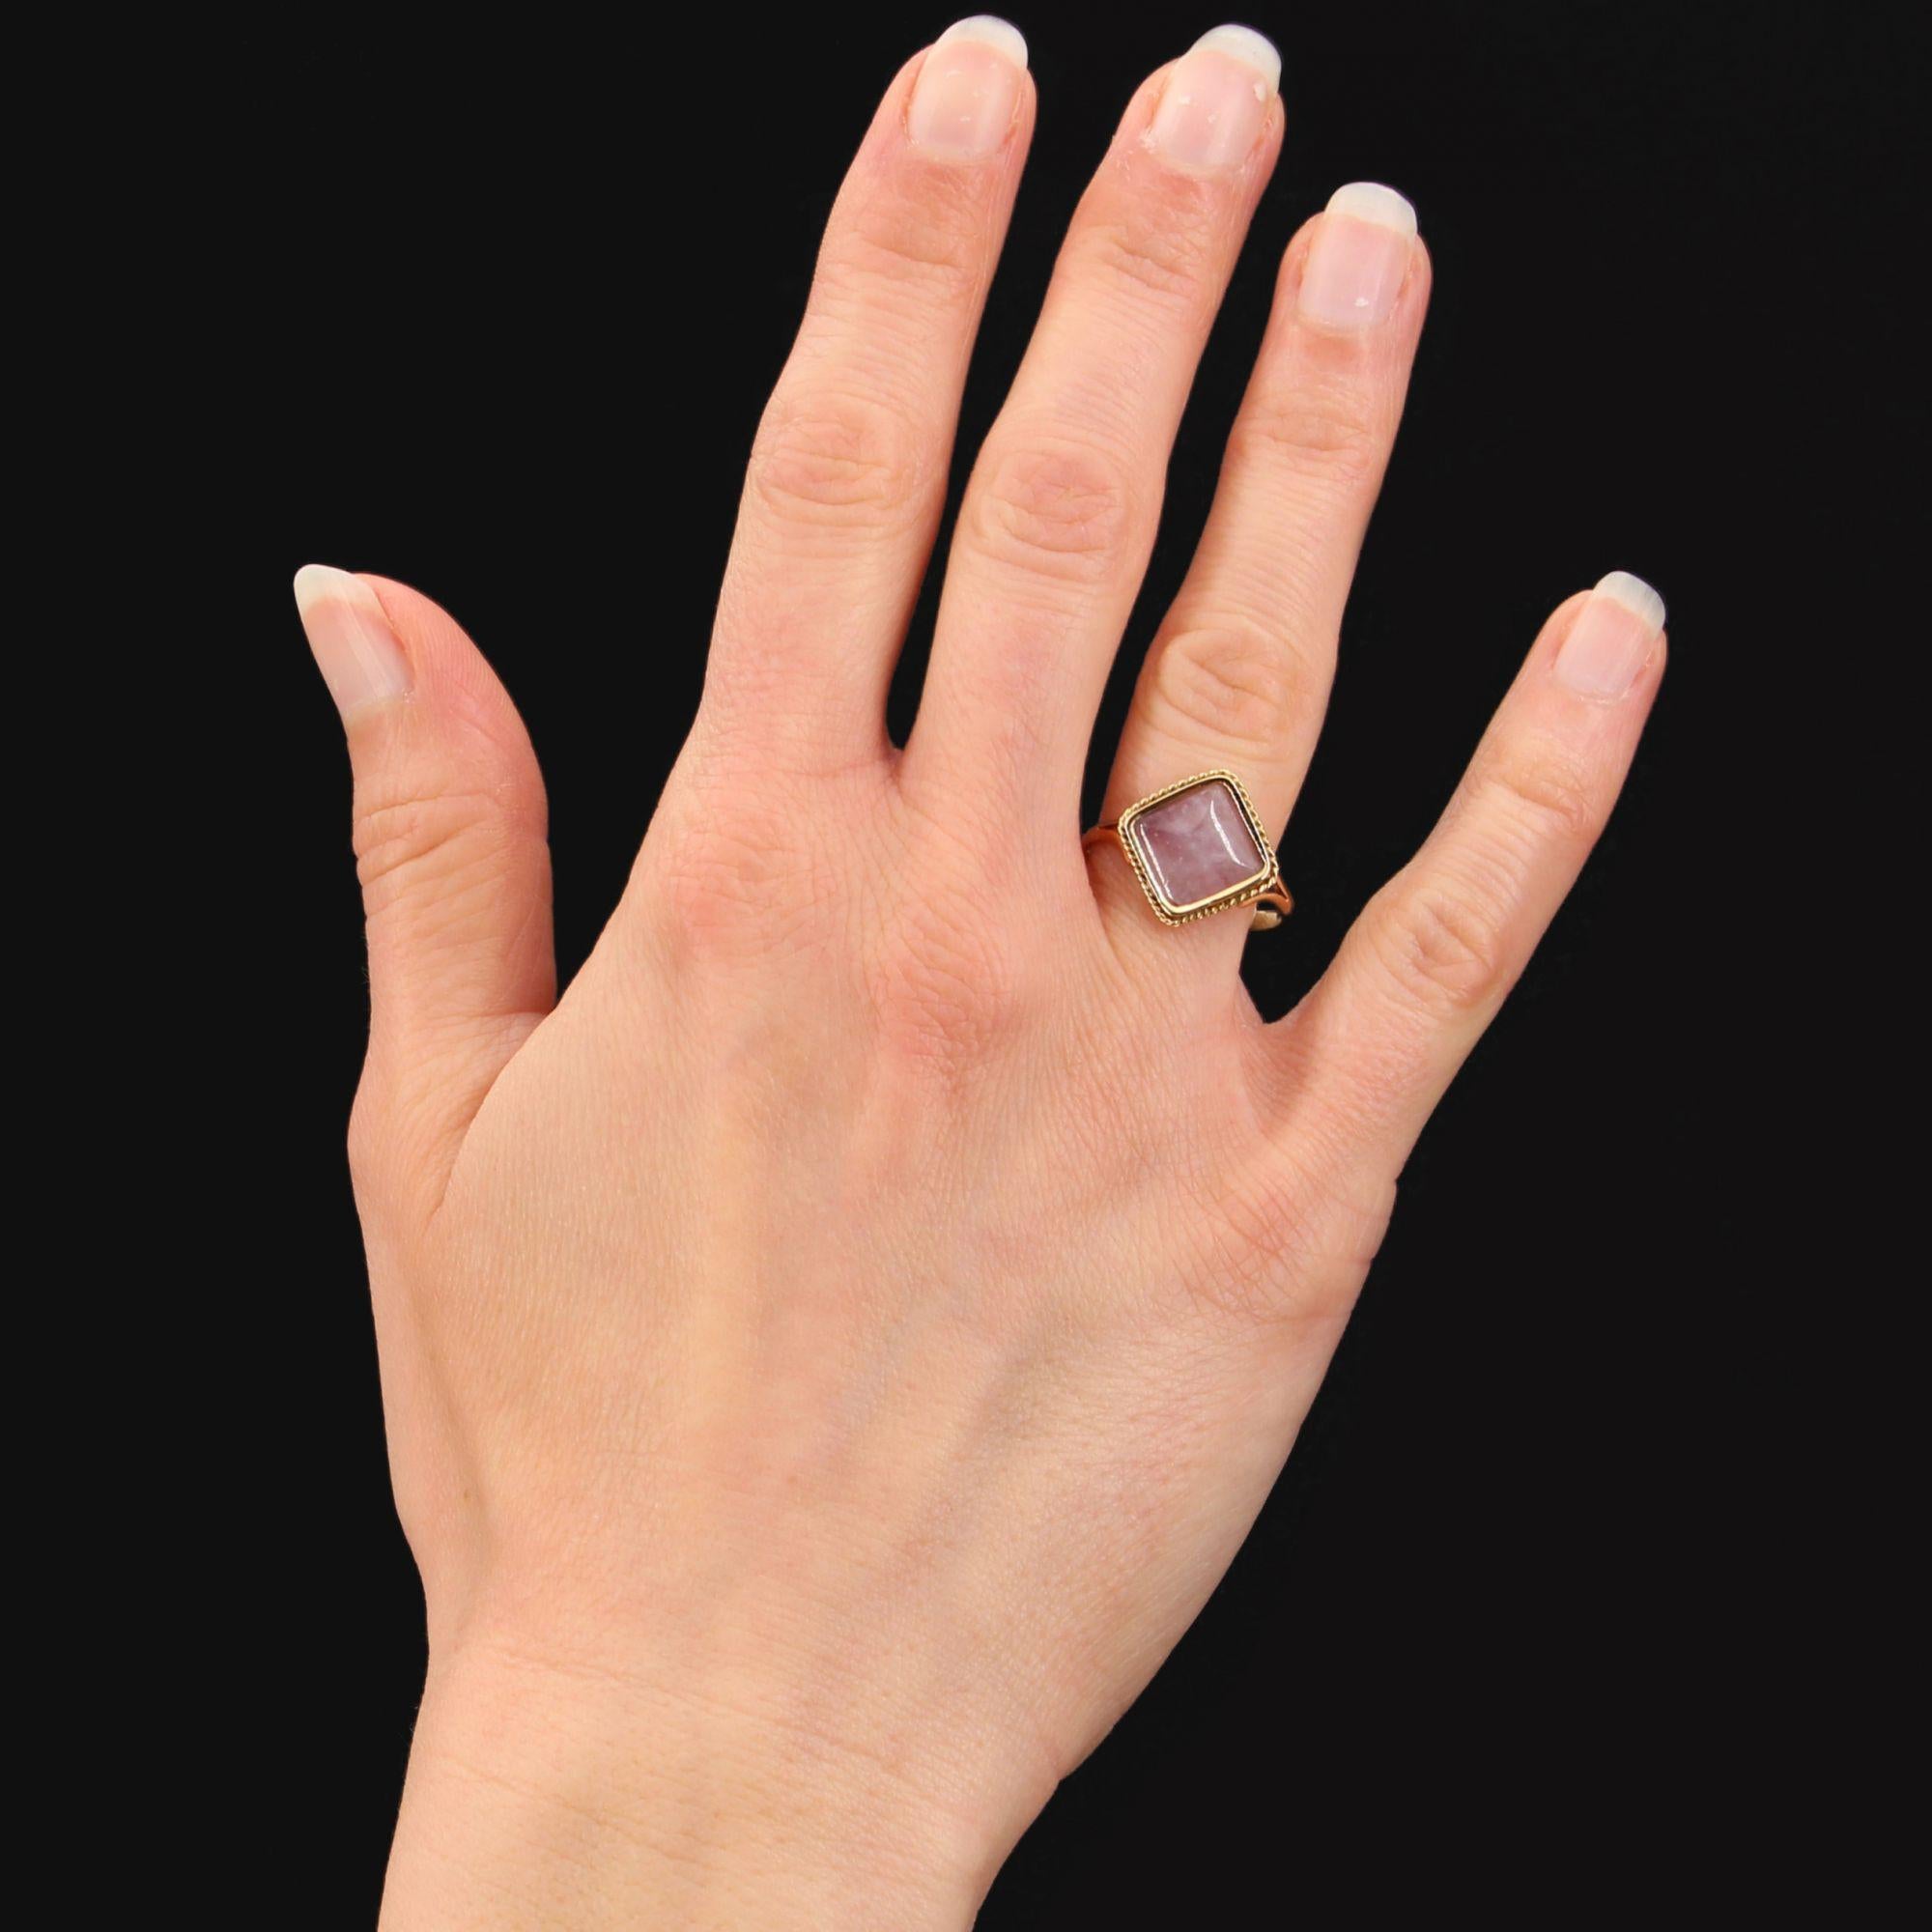 Ring in 18 karat yellow gold, eagle head hallmark.
This thin antique ring in the shape of diamond, is decorated with a sugarloaf cabochon amethyst surrounded by a twist of gold.
Height : 15 mm, width : 15 mm, thickness : 3.5 mm, width of the ring at